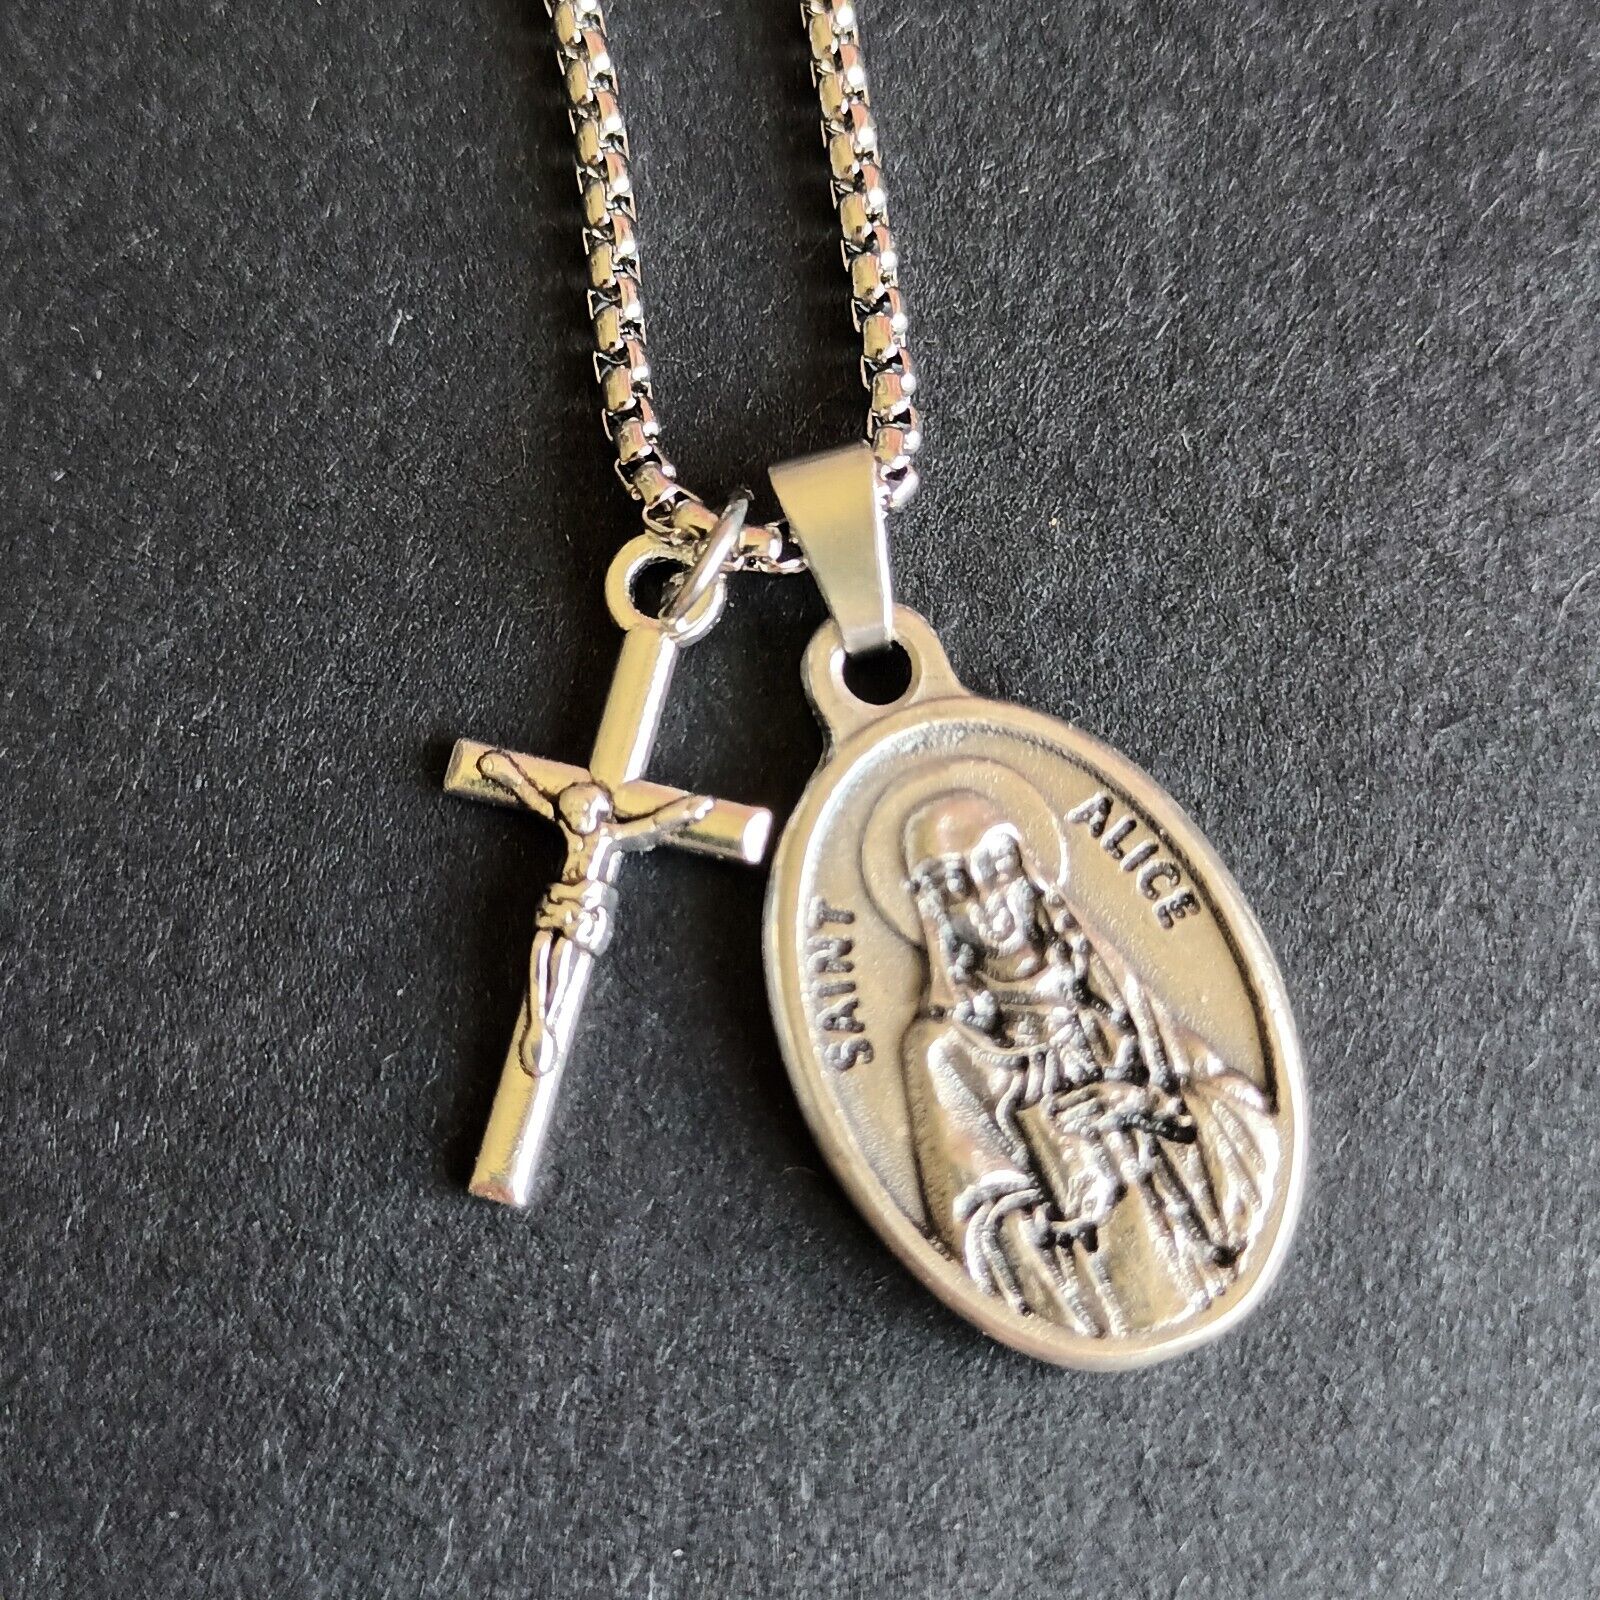 St Alice necklace. Stainless steel chain with medal and cross.